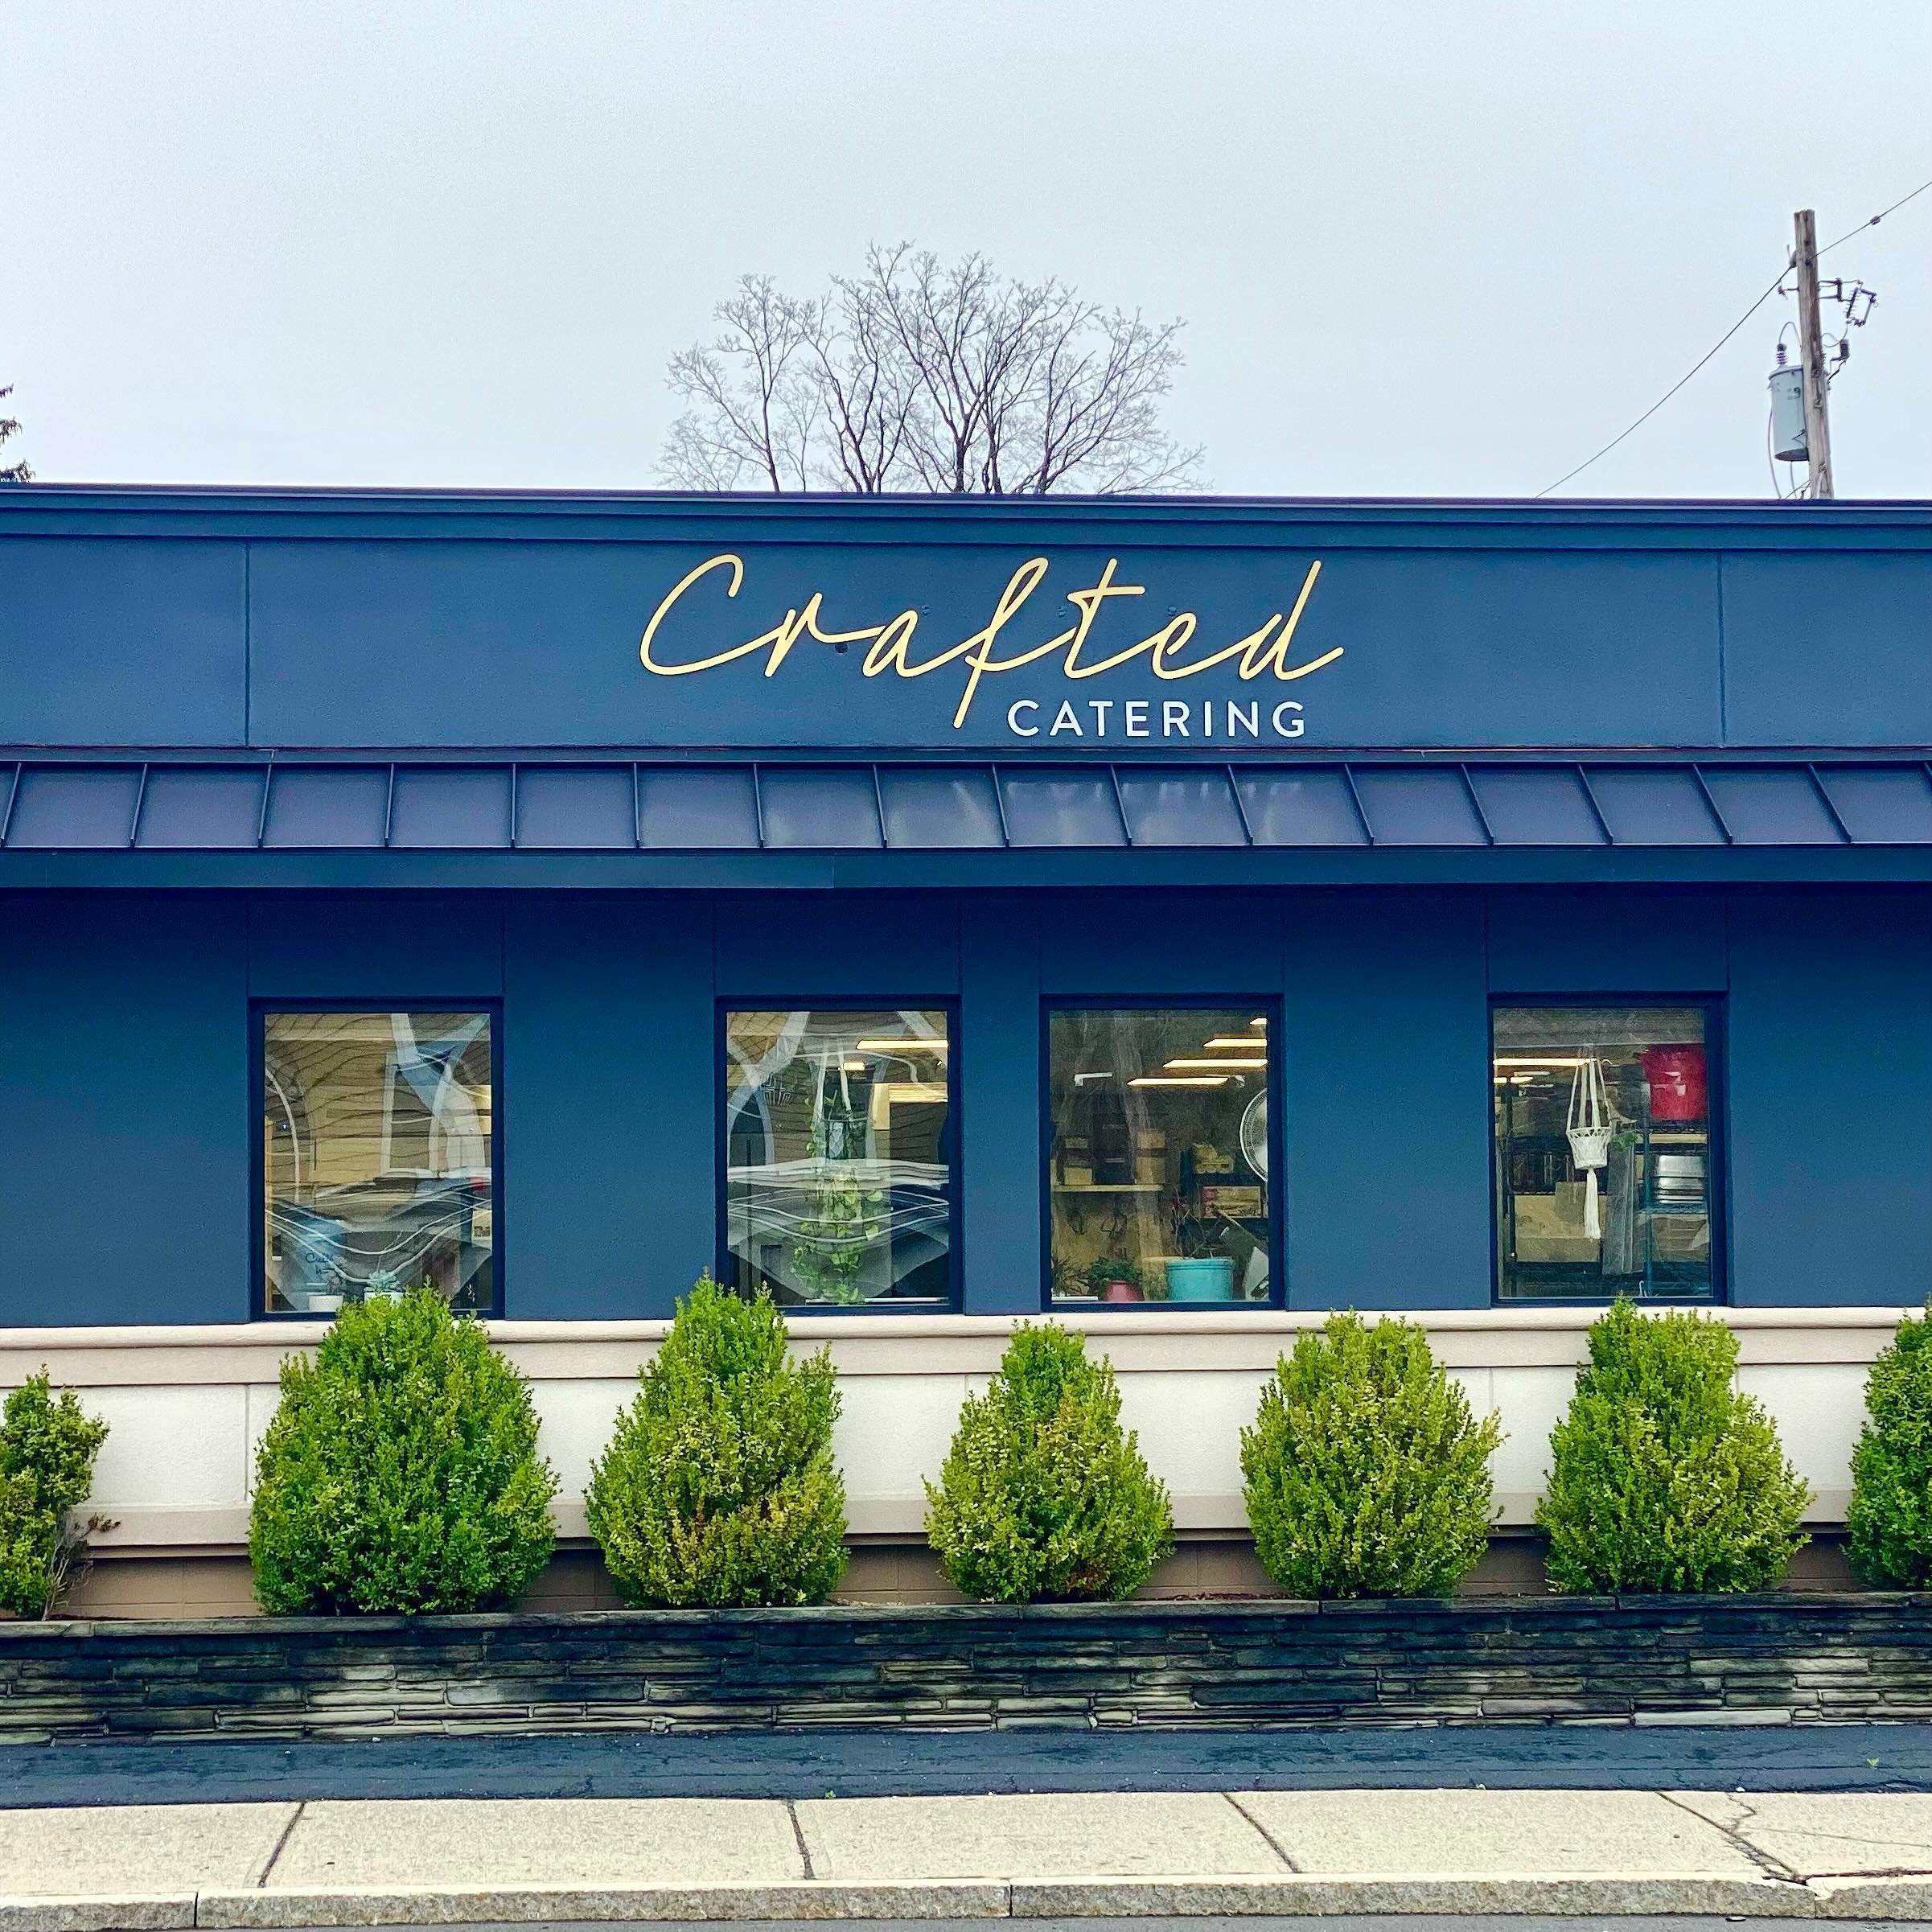 We&rsquo;re feeling right at home at 769 Pawling Avenue, thanks to our new sign from @ajsignco ! 🏠✨ It&rsquo;s the little touches that make our headquarters feel cozy and welcoming. 

Drive by and check it out!

#HomeSweetHQ